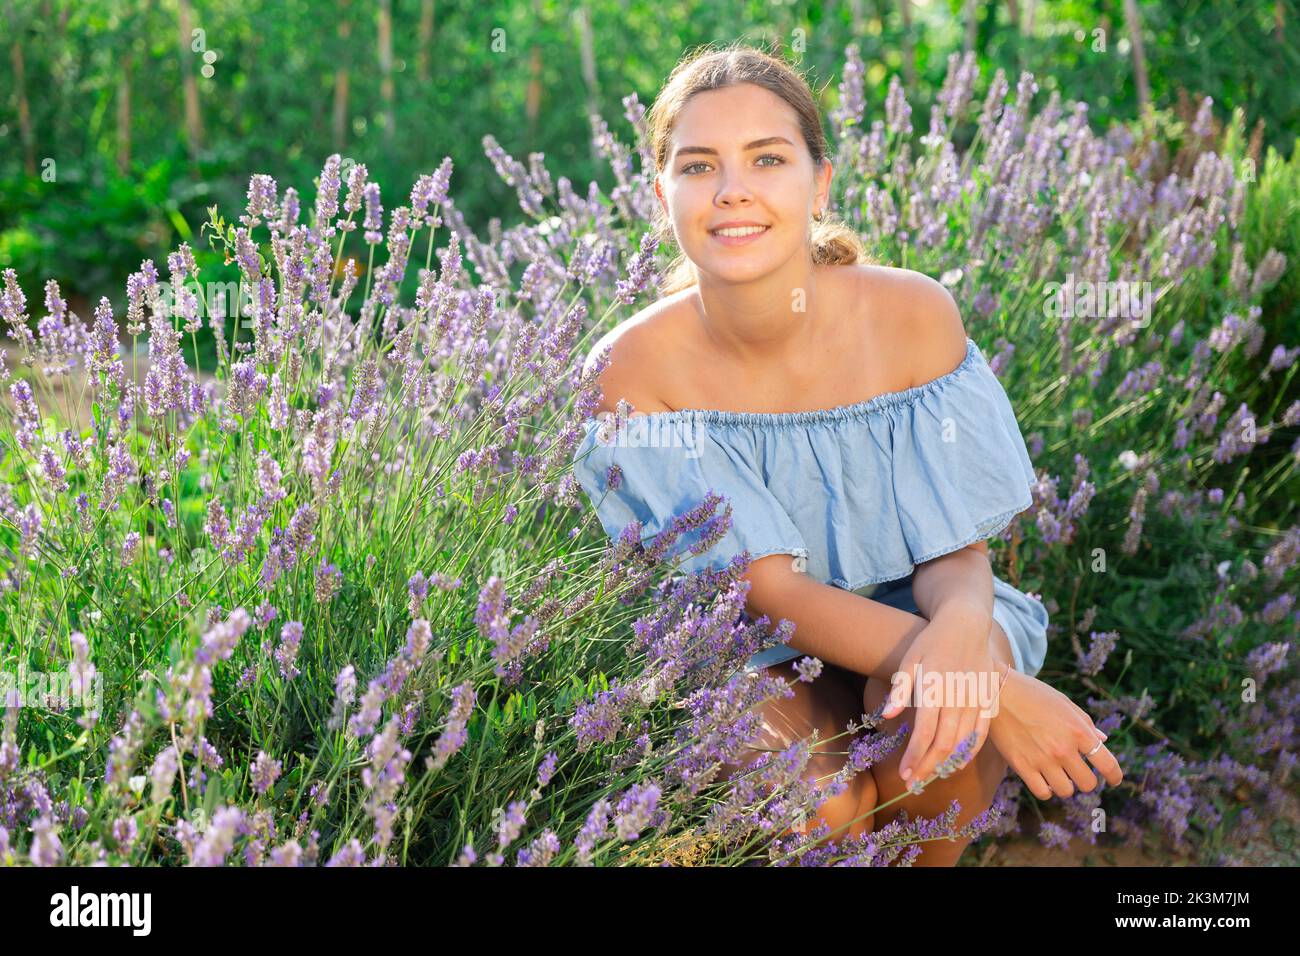 Portrait of woman with basket on lavender field Stock Photo